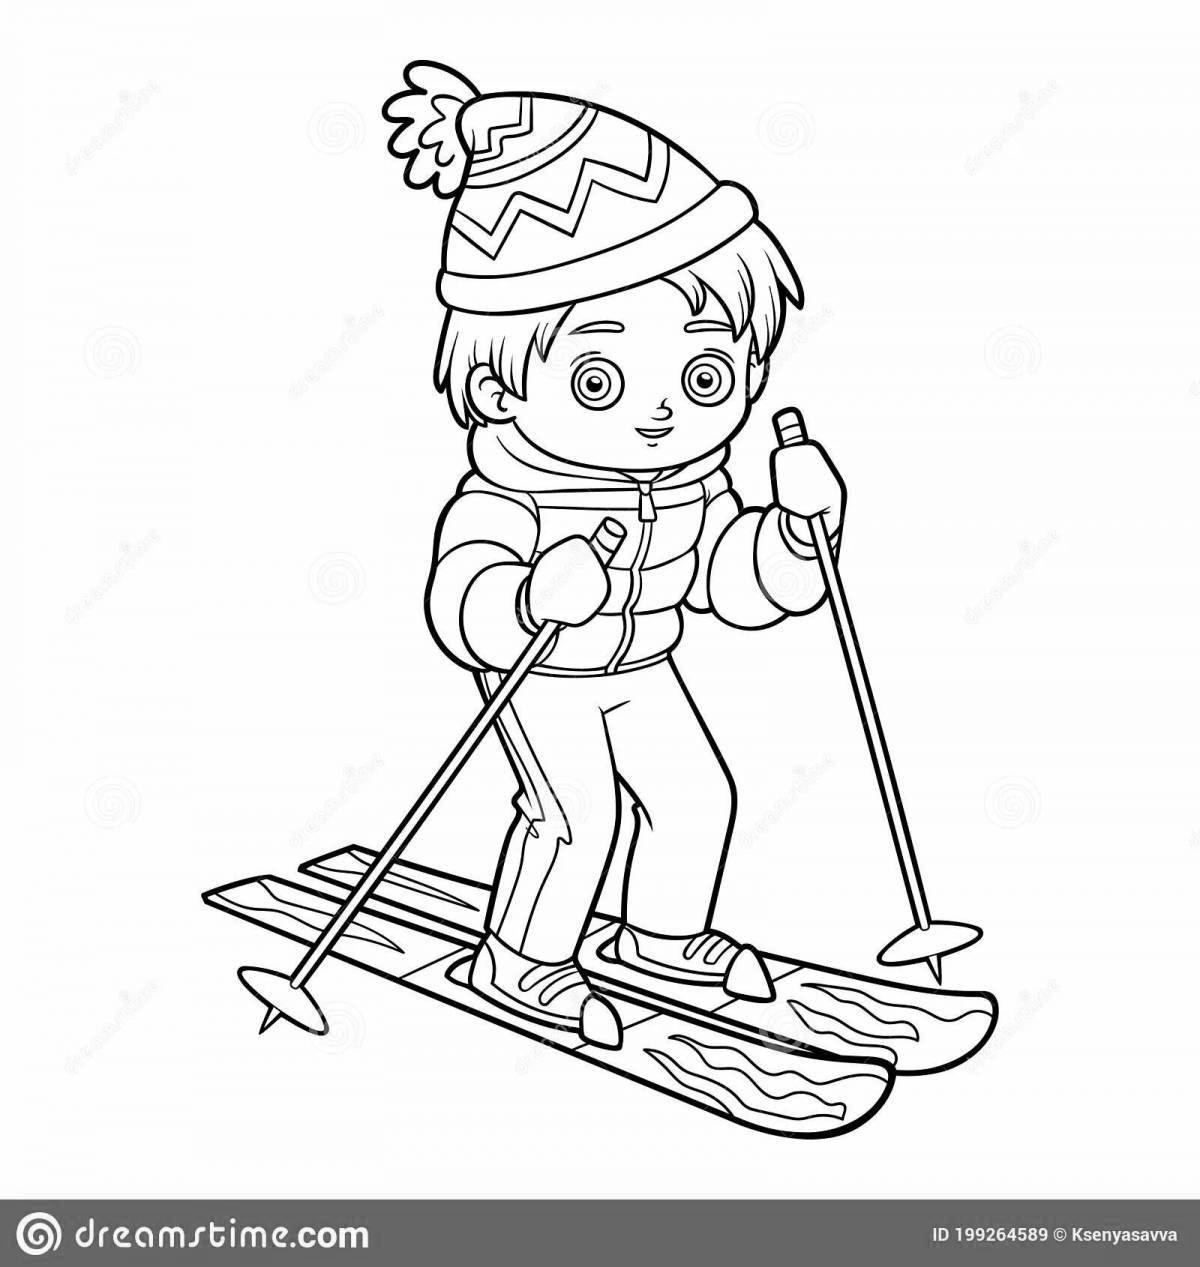 Pretty ski coloring pages for students